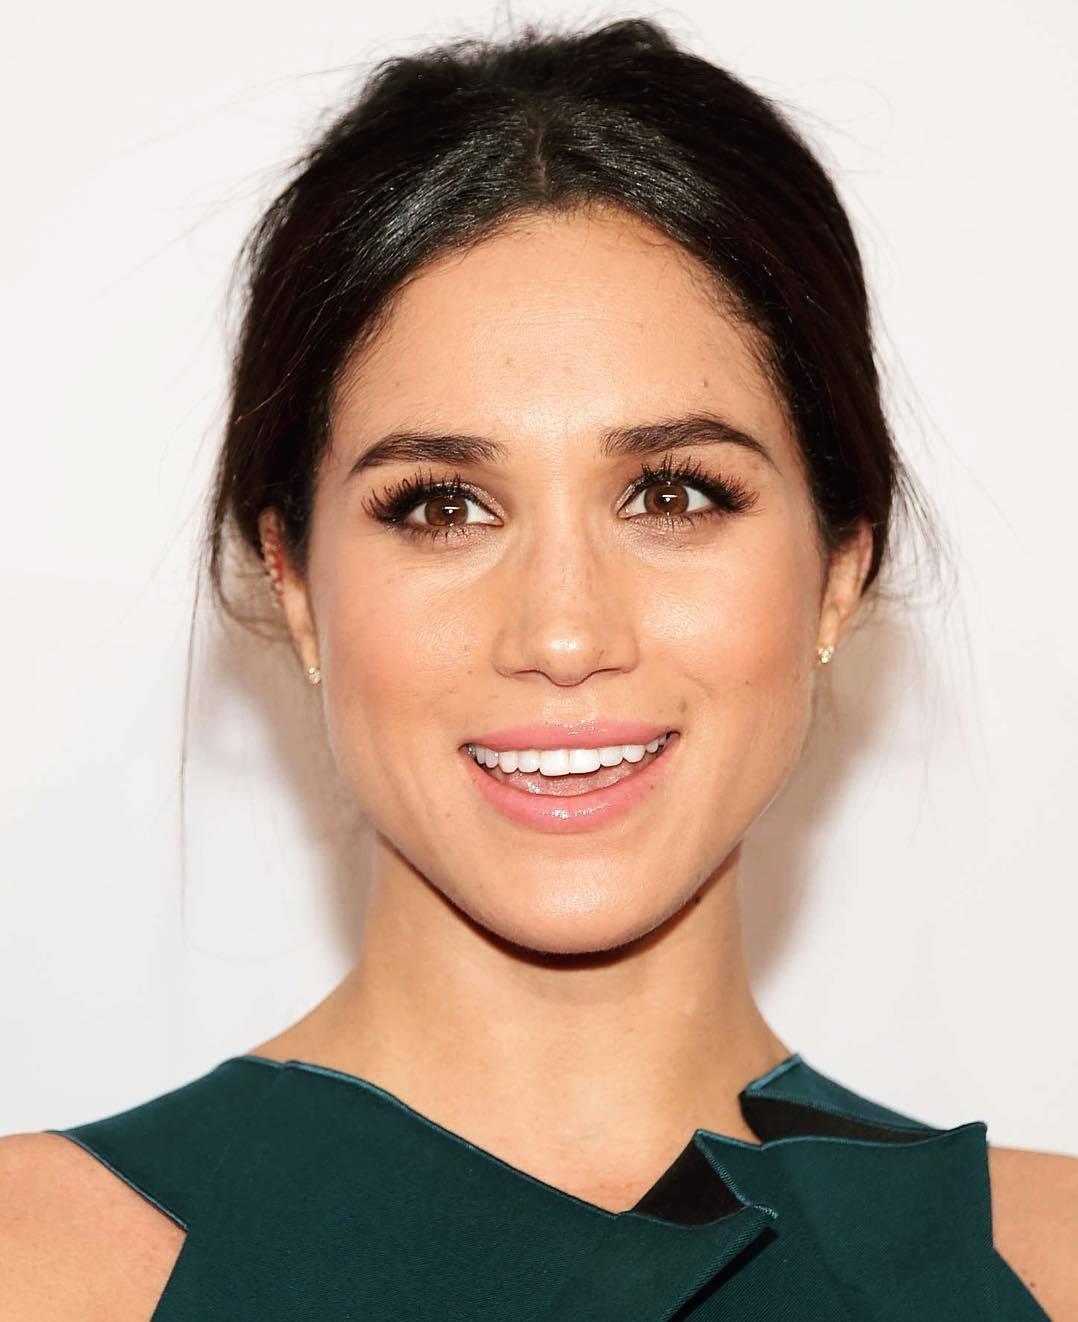 Meghan Markle Biography (Age, Height, Weight, Husband, Family, Career & More)